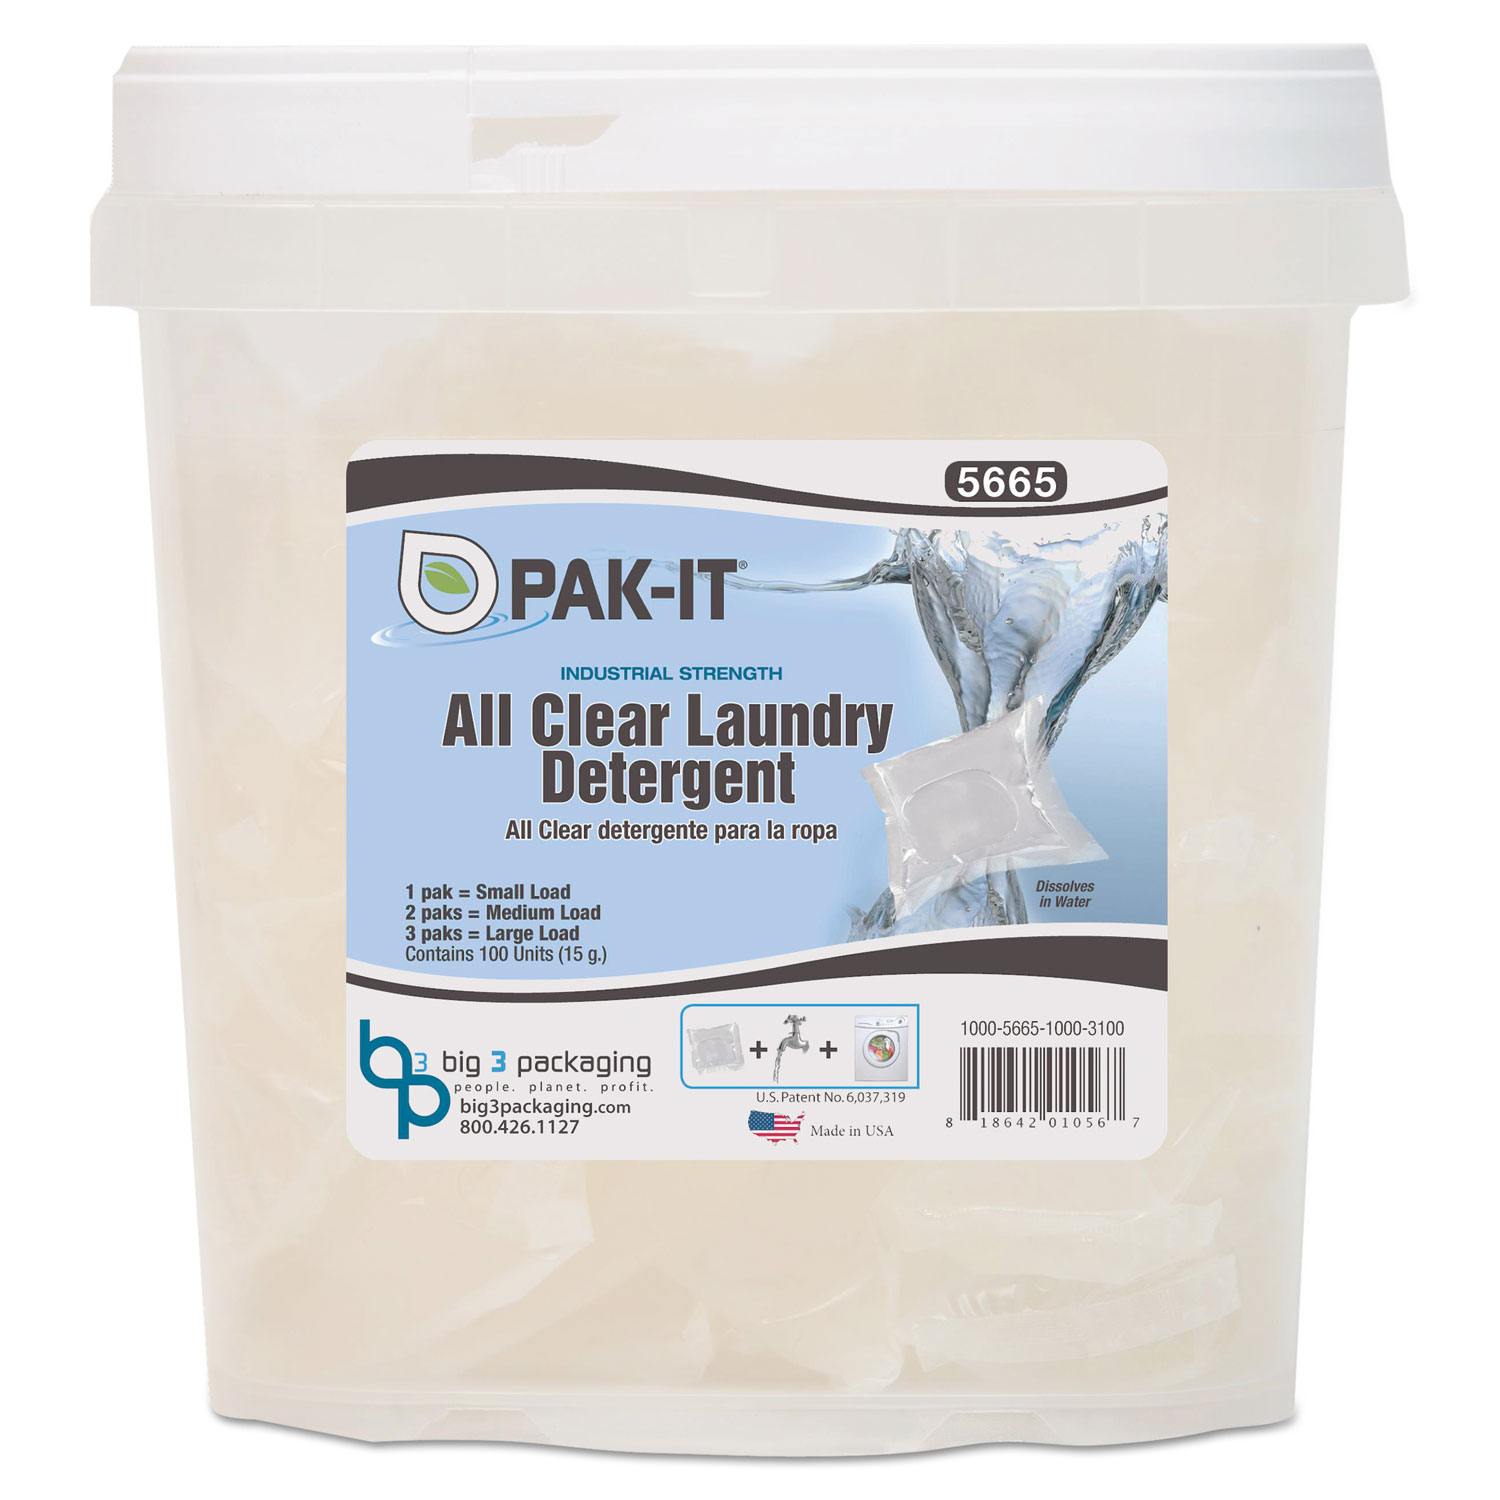 All Clear Laundry Detergent, Fragrance Free, 15 g Paks, 100/Tub